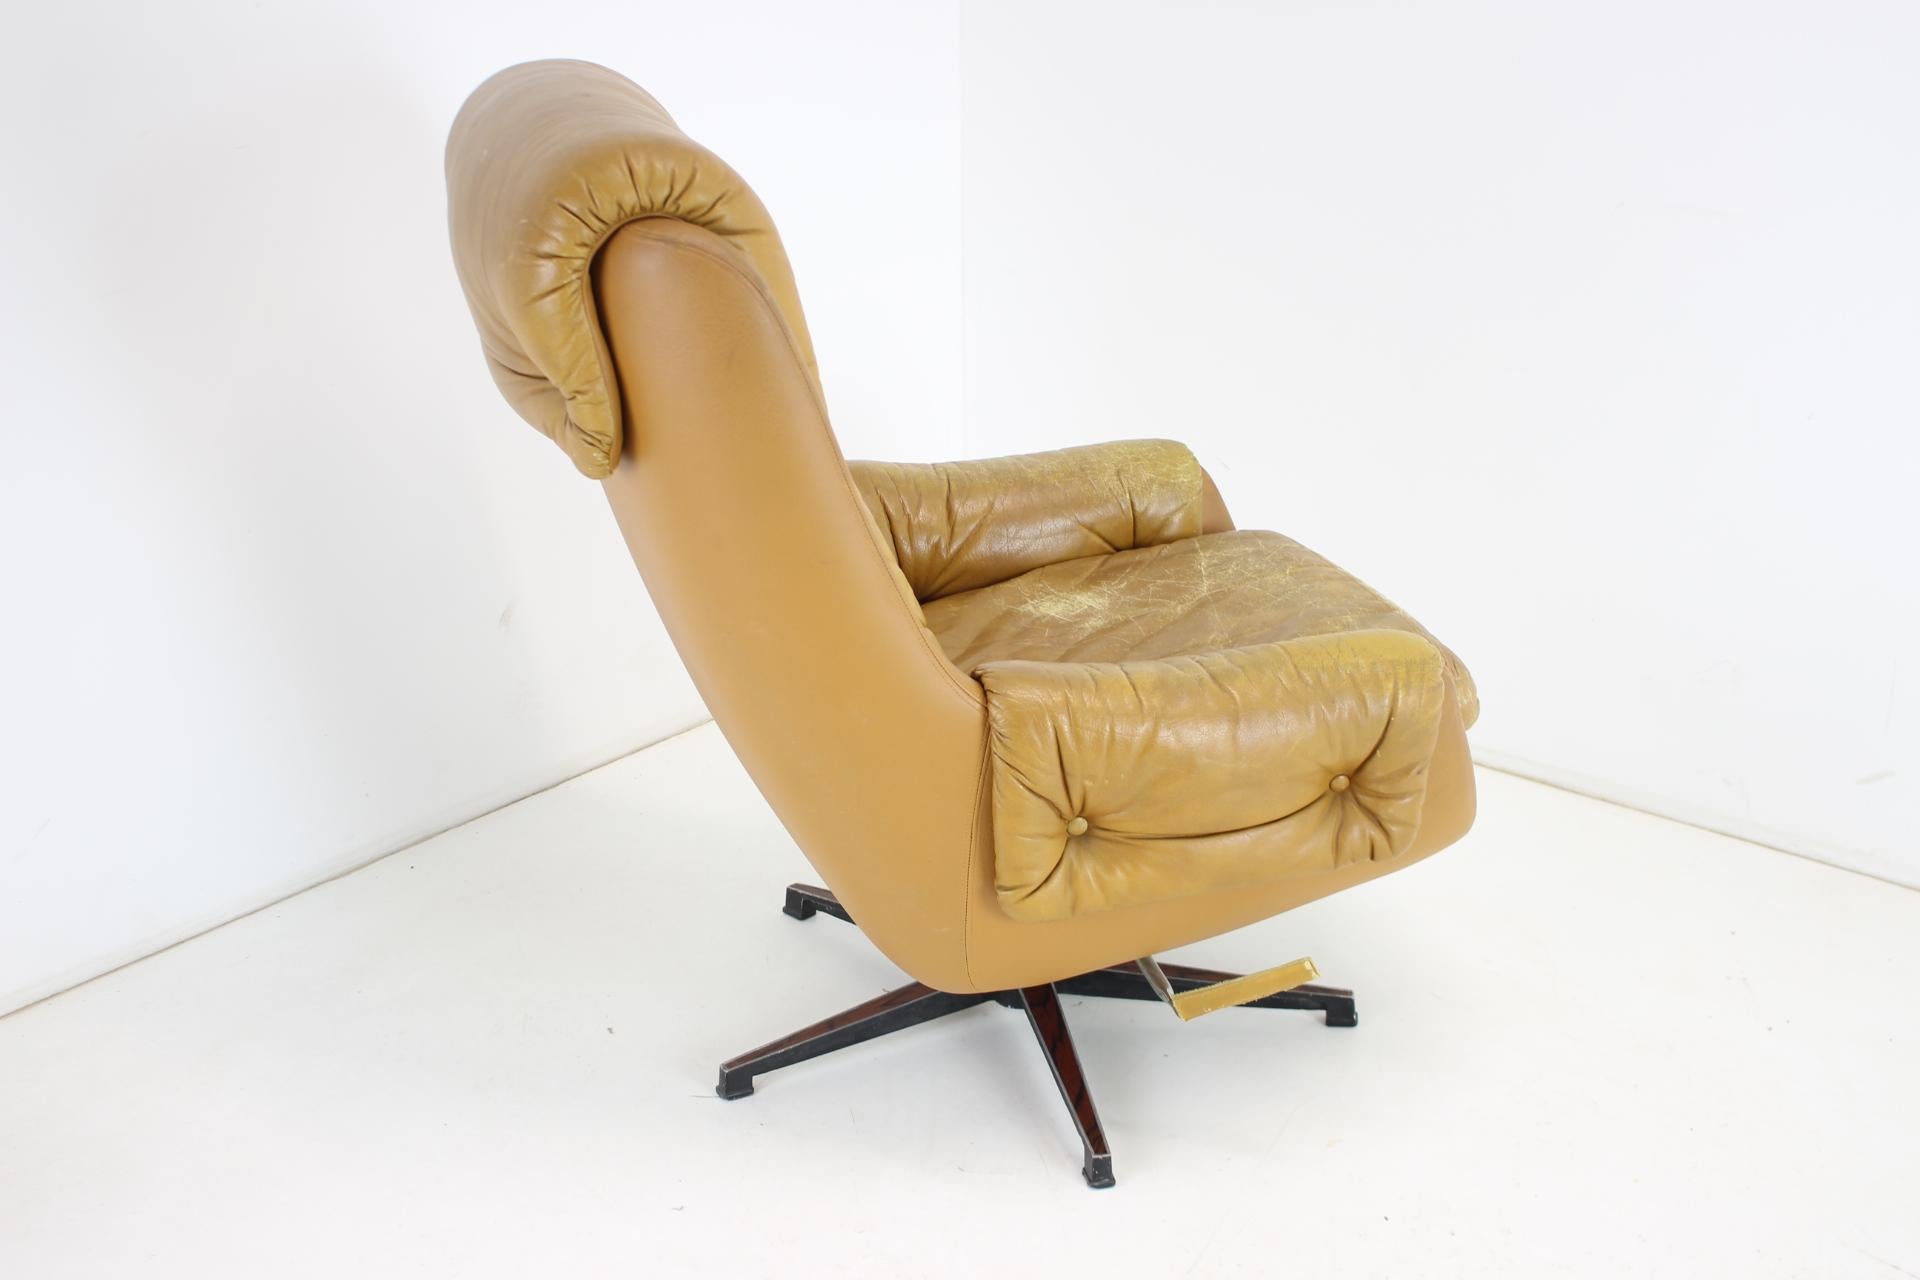 Midcentury Swivel Leather Armchair, Peem, Finland, 1970s In Good Condition For Sale In Praha, CZ